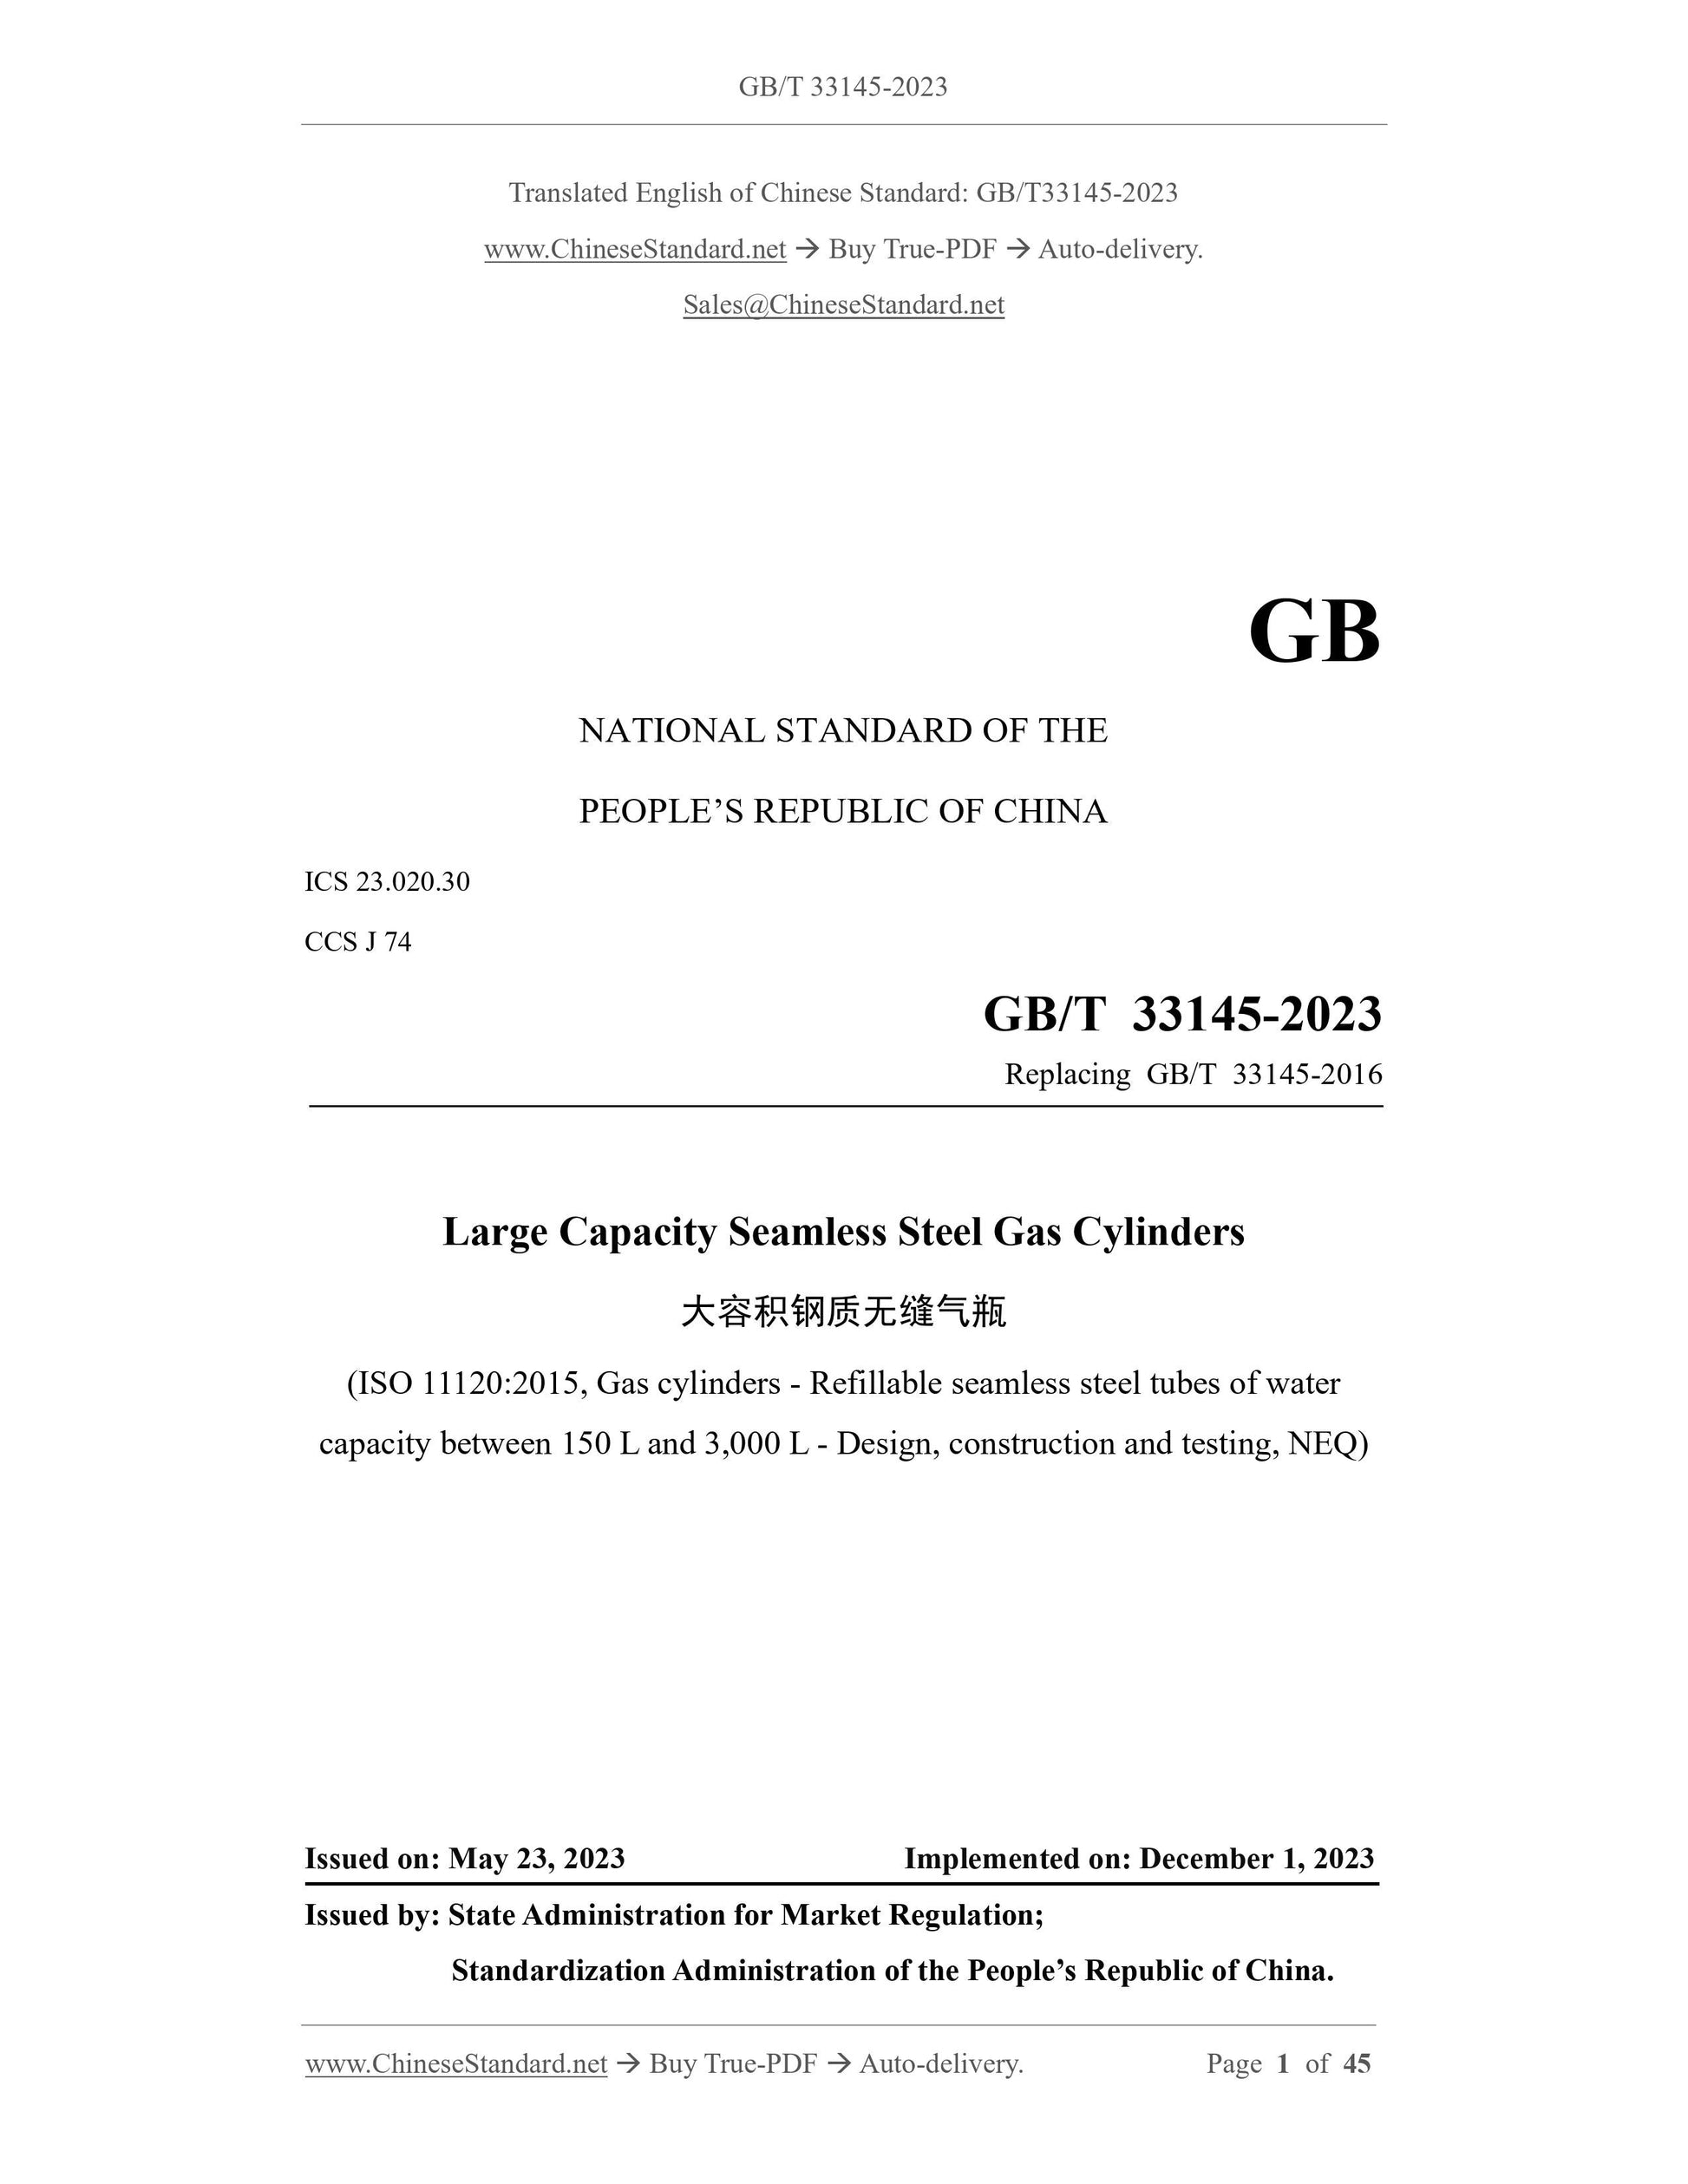 GB/T 33145-2023 Page 1